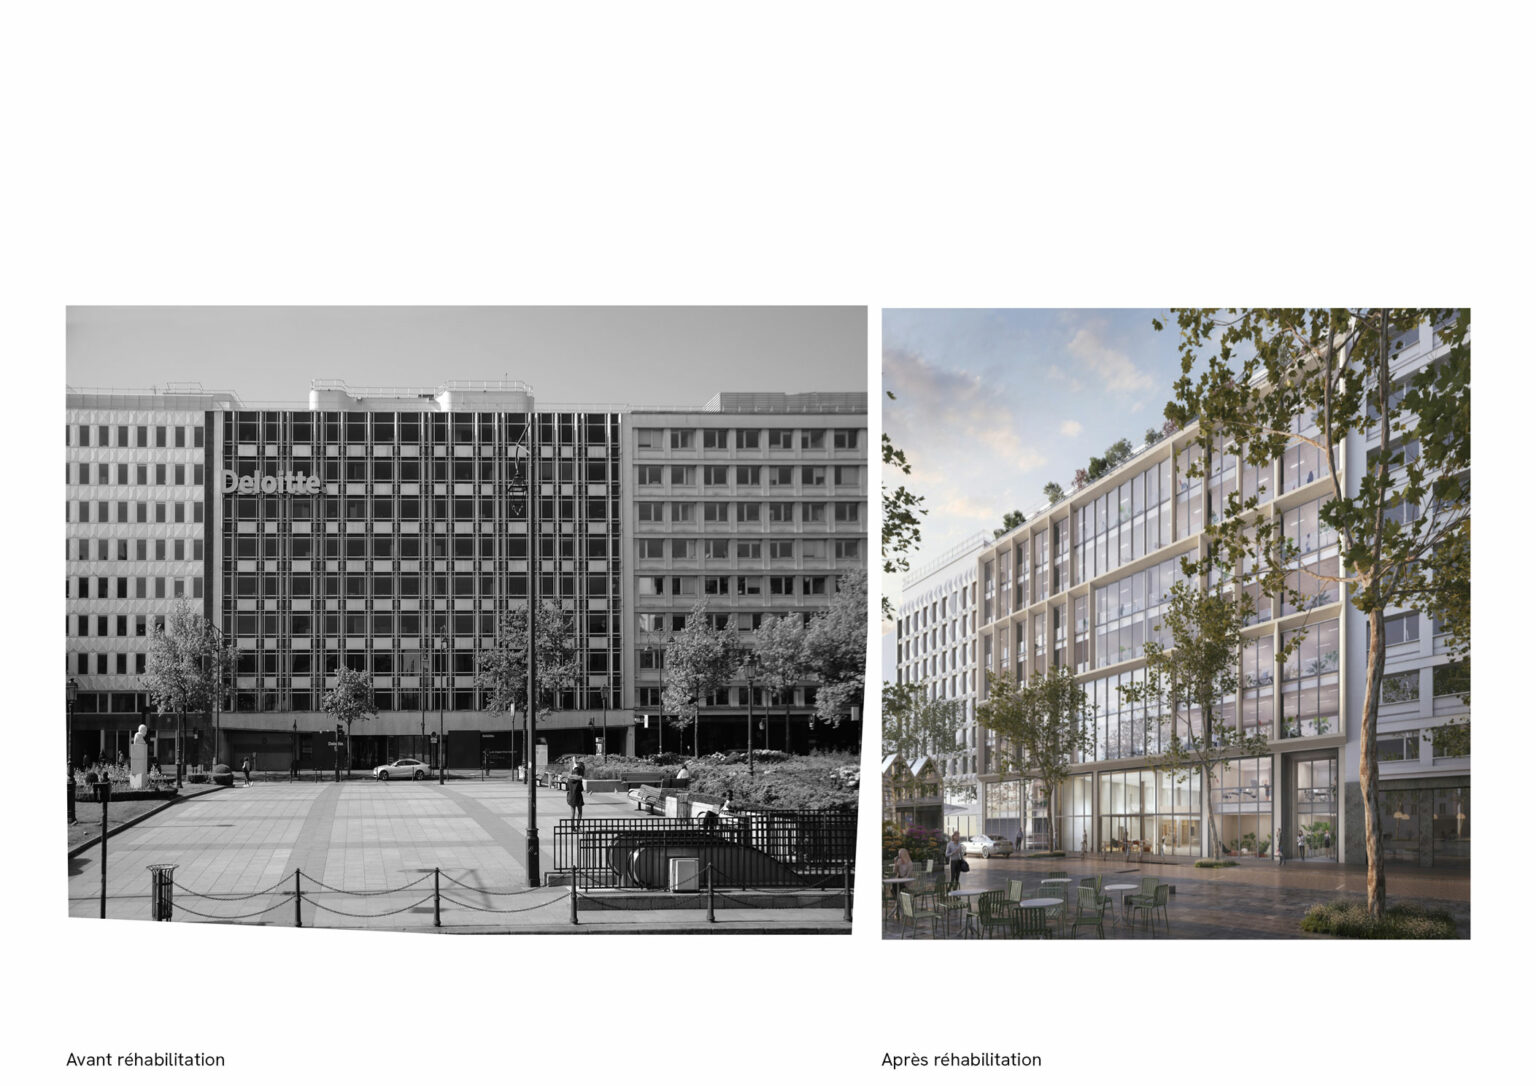 185 avenue Charles de Gaulle, Neuilly, before and after